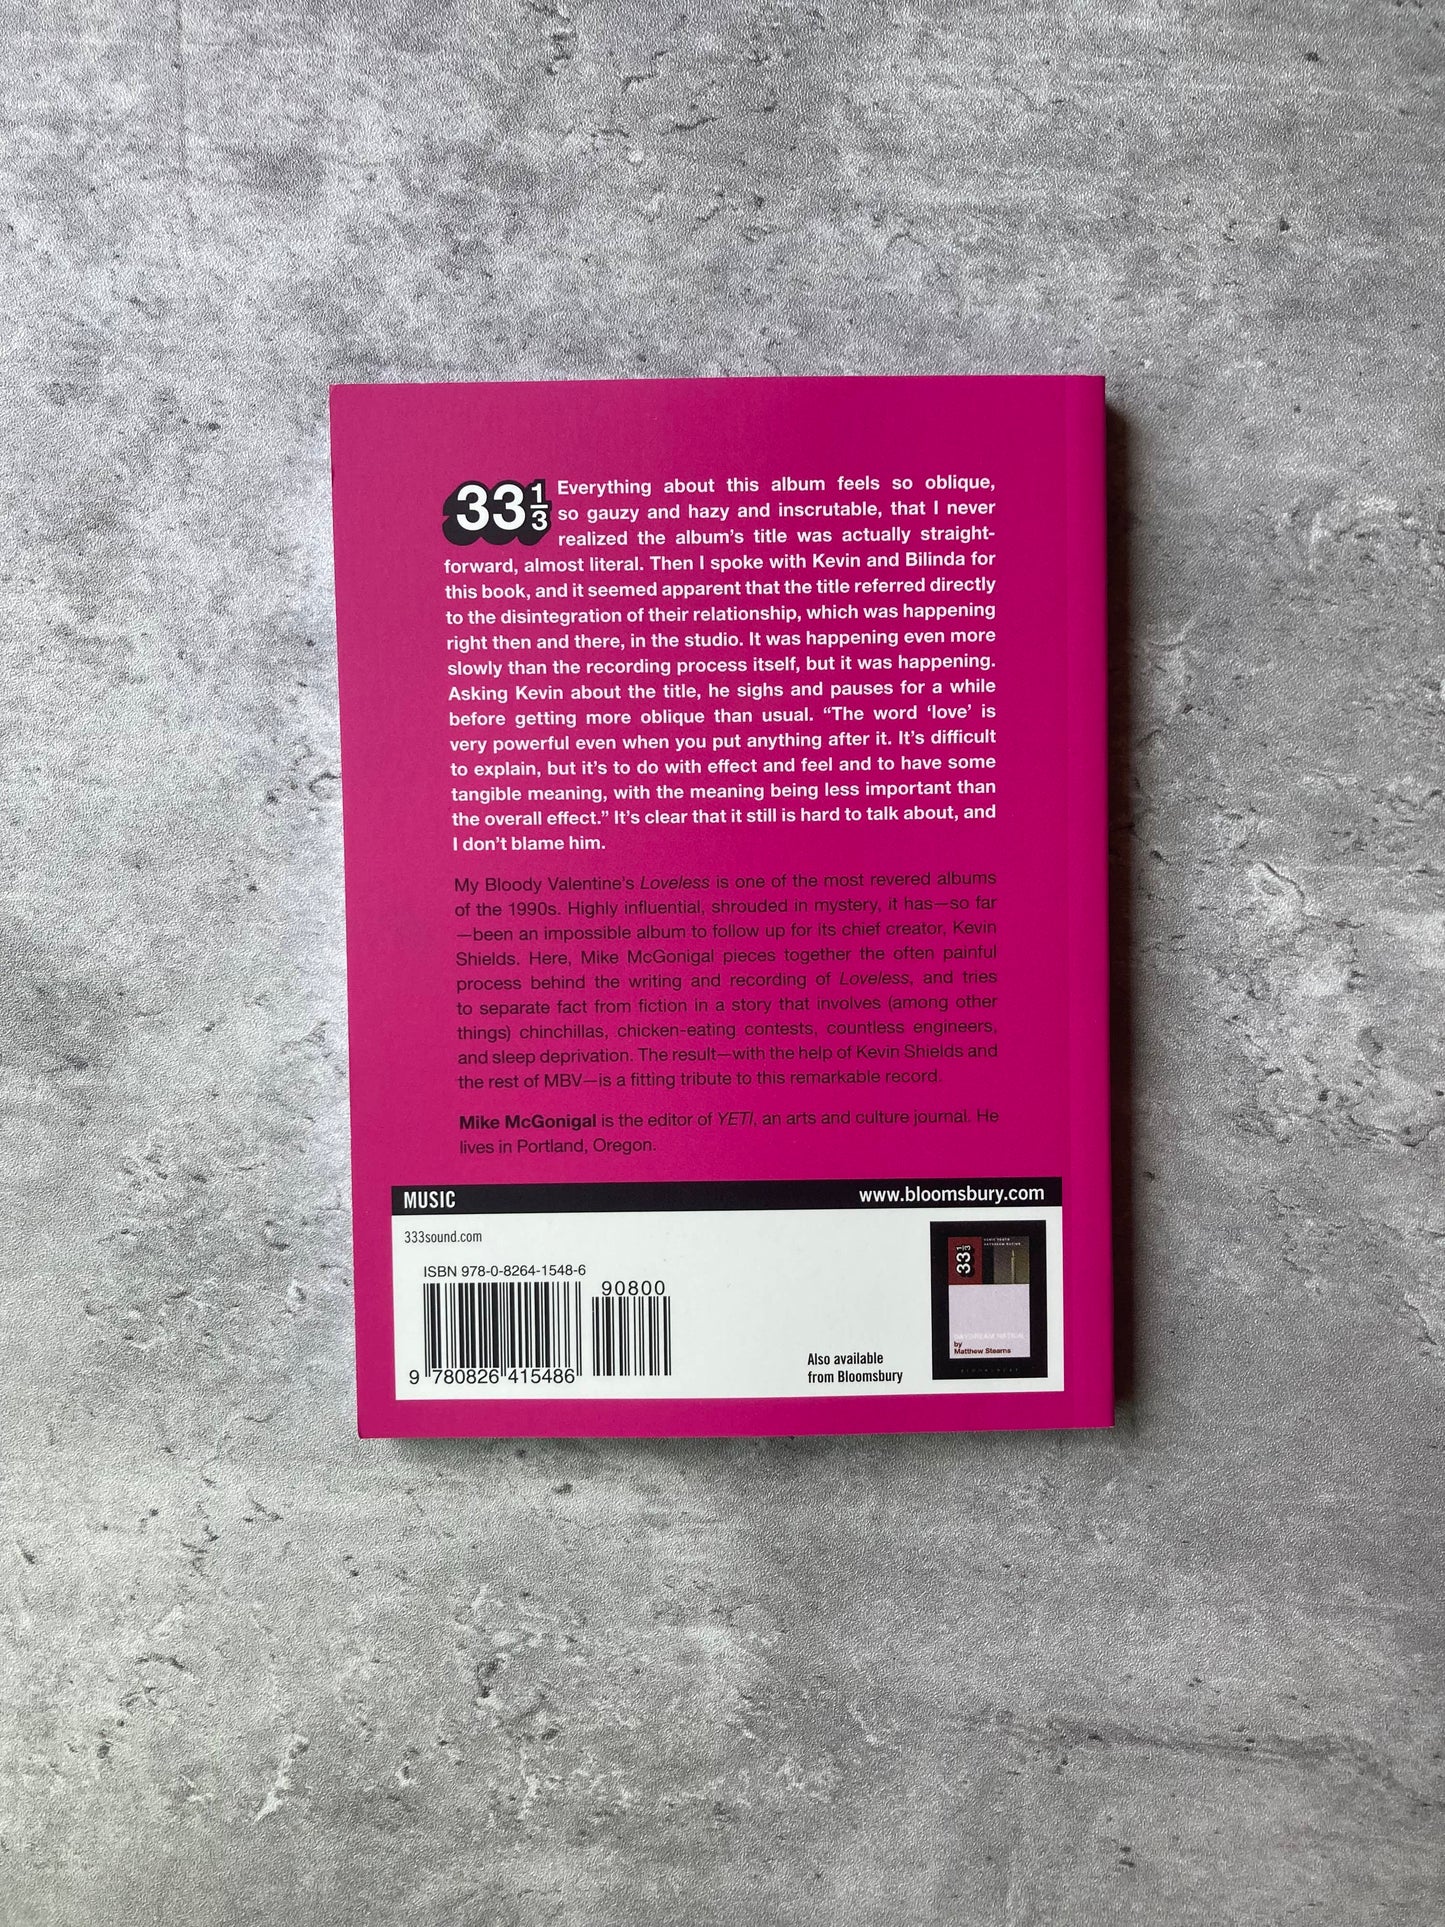 Cover of 33 1/3's Loveless by My Bloody Valentine written by Mike McGonigal. Shop all new and used books online at The Stone Circle, the only online bookstore in Los Angeles, California. 